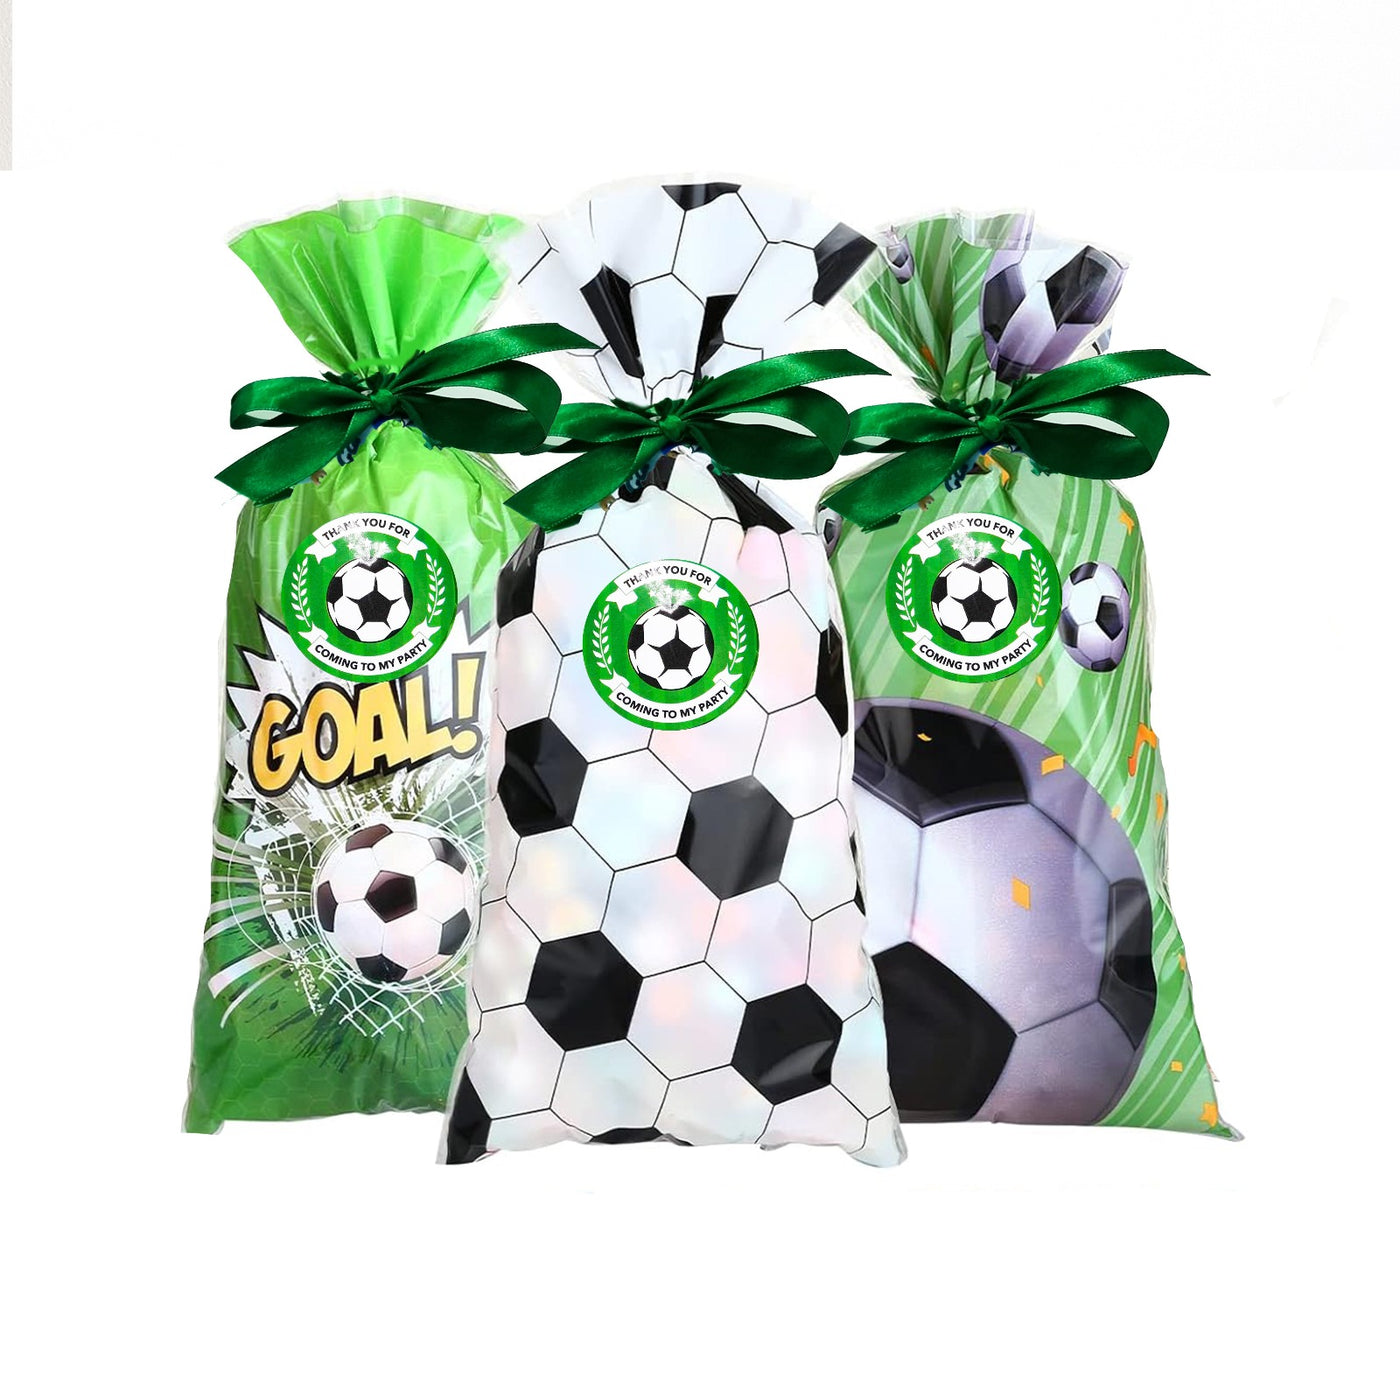 Children's Pre-filled Football Party Bags With Novelty Toys, Activity Books, Football Tattoos, Football Bracelets And Sweets.